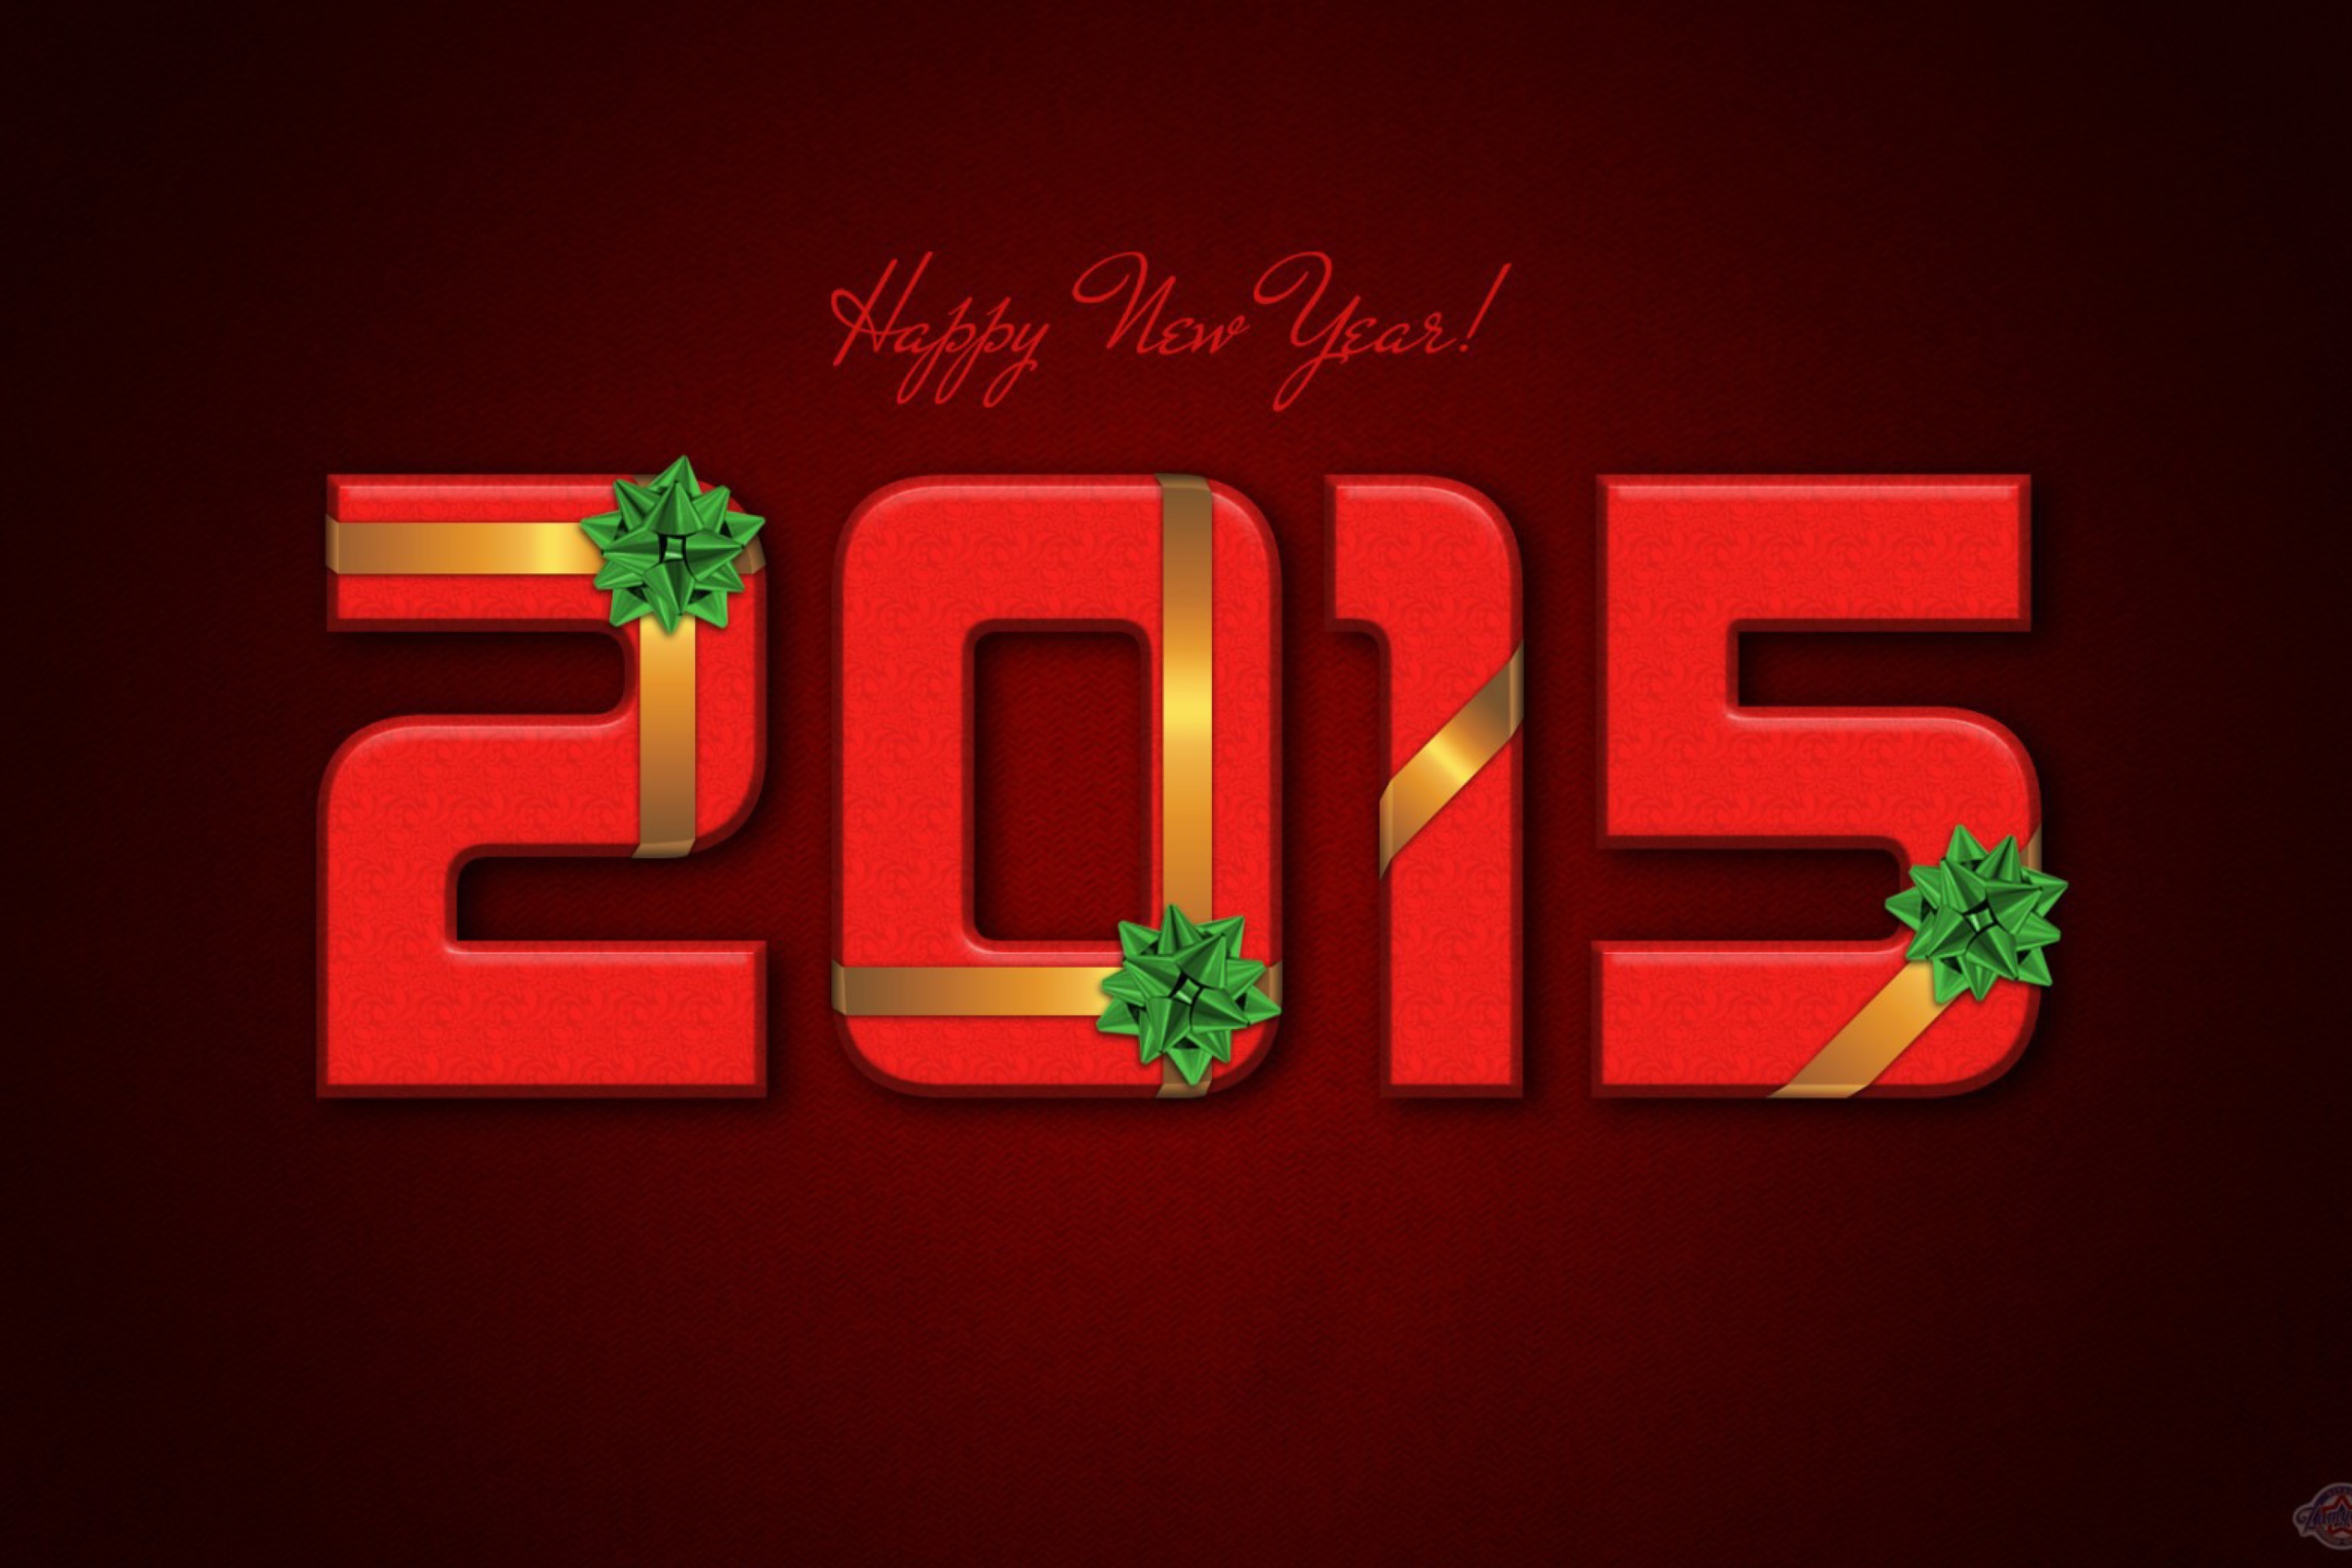 New Year 2015 Red Texture wallpaper 2880x1920